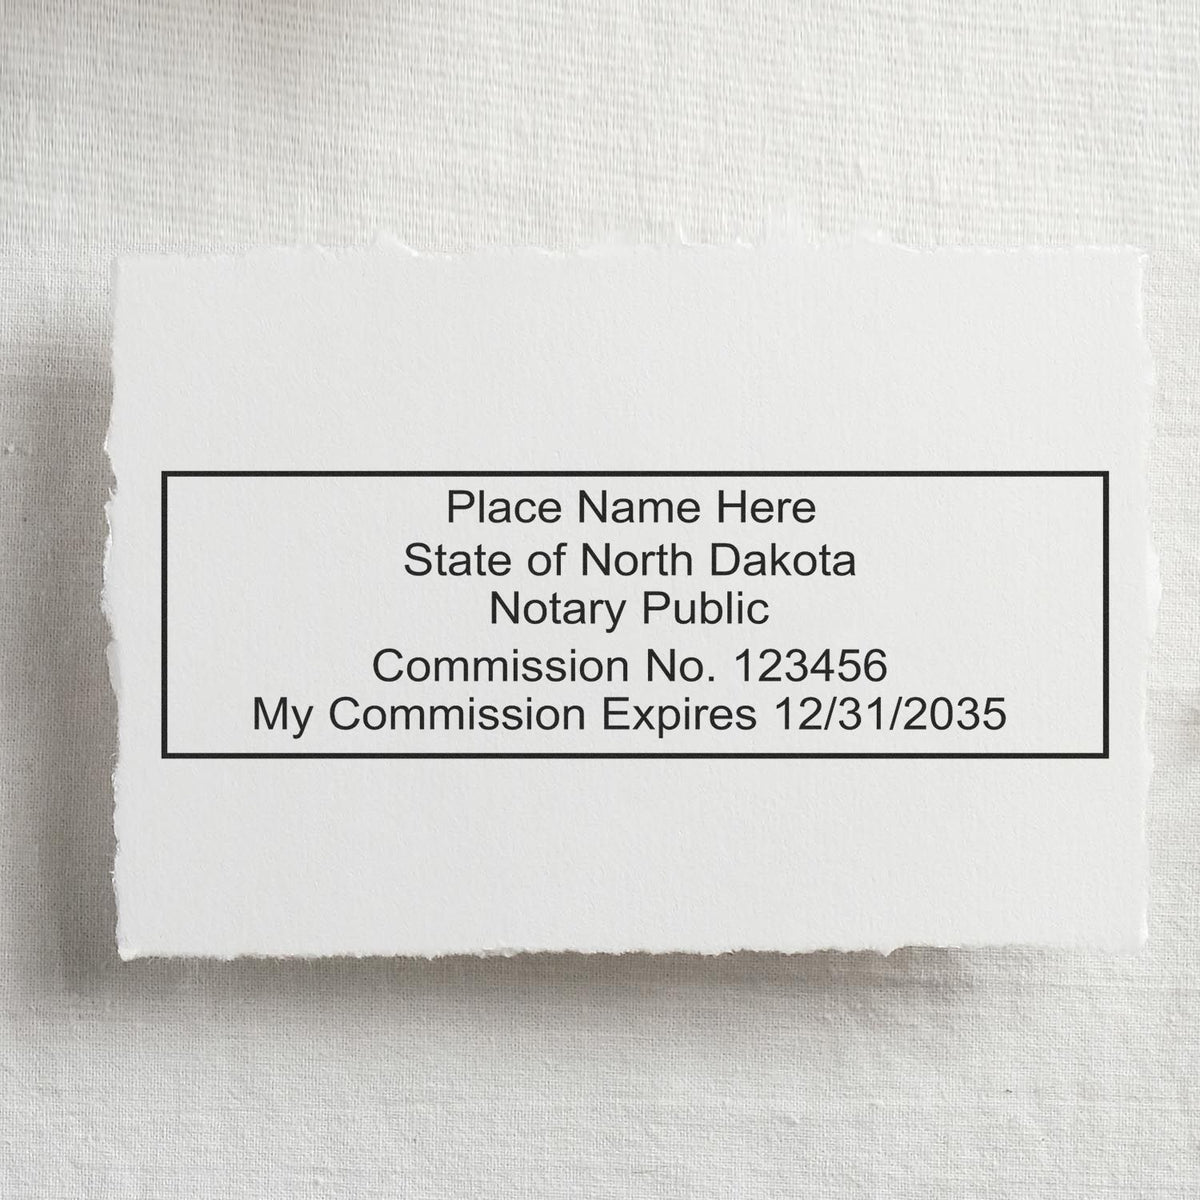 A stamped impression of the Slim Pre-Inked Rectangular Notary Stamp for North Dakota in this stylish lifestyle photo, setting the tone for a unique and personalized product.